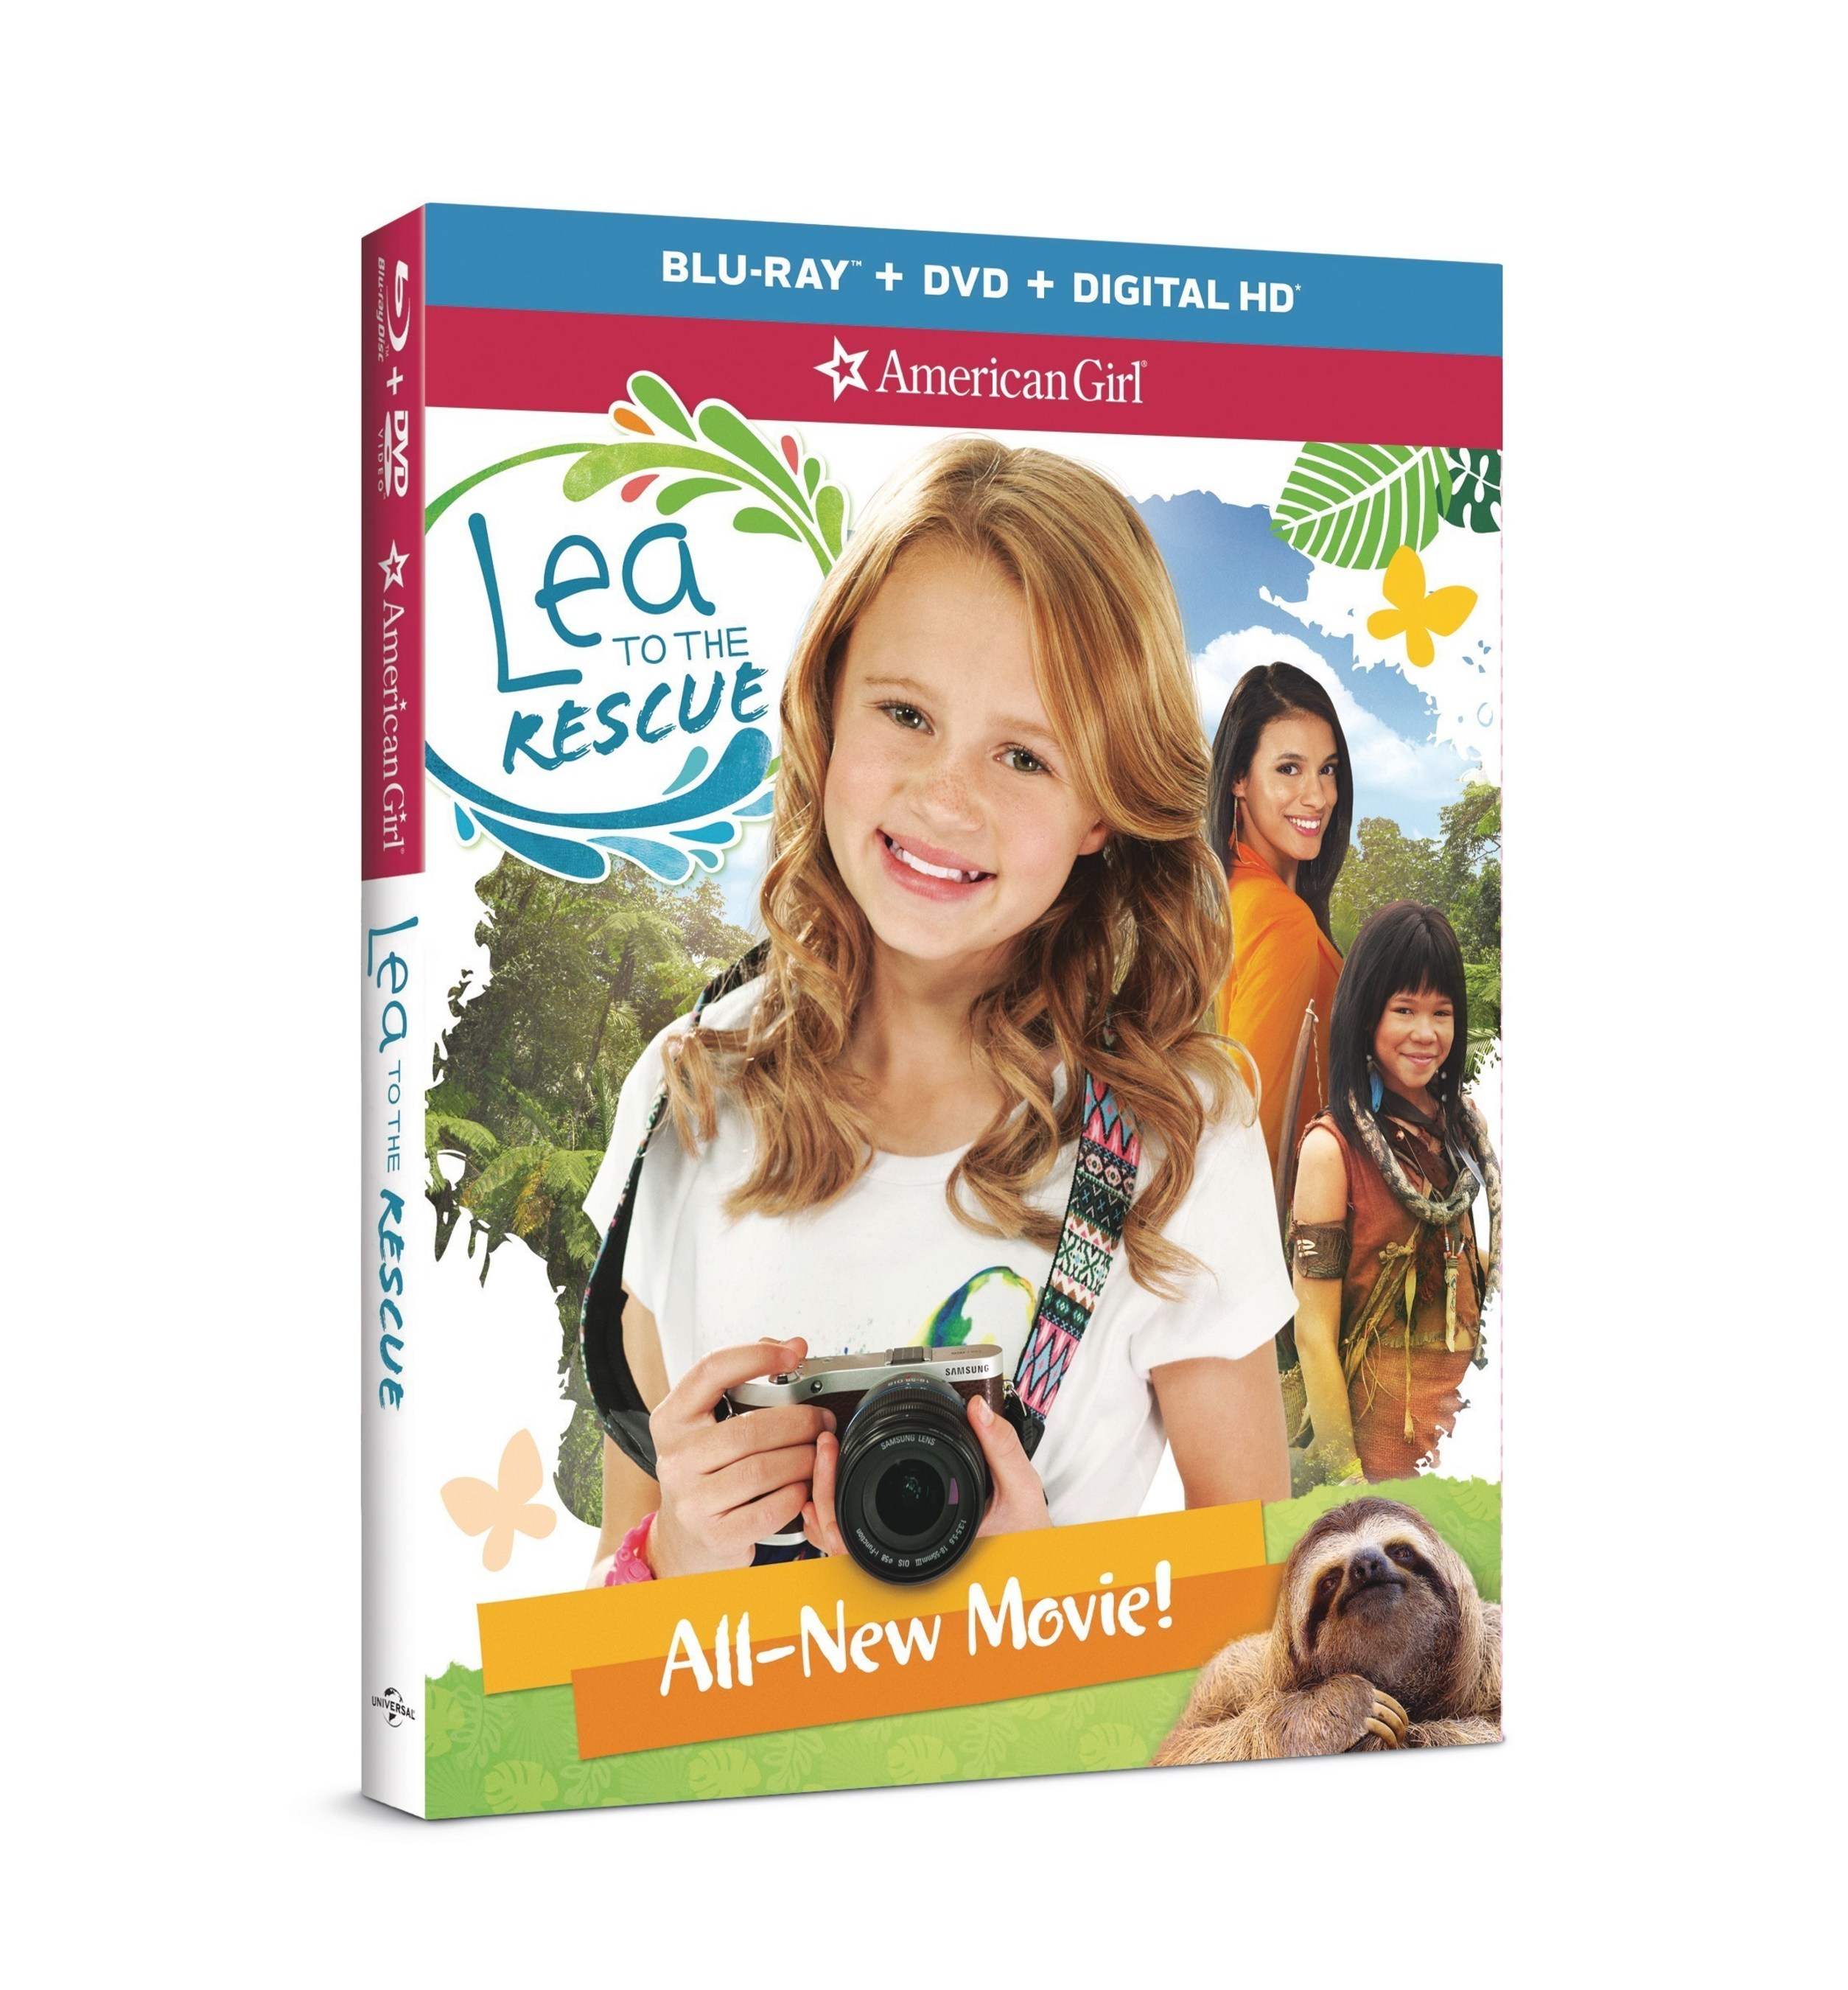 The all-new action adventure, American Girl: Lea to the Rescue, which debuts on Blu-ray(TM) Combo Pack, DVD, and On Demand on Tuesday, June 14th, 2016, from Universal Pictures Home Entertainment.